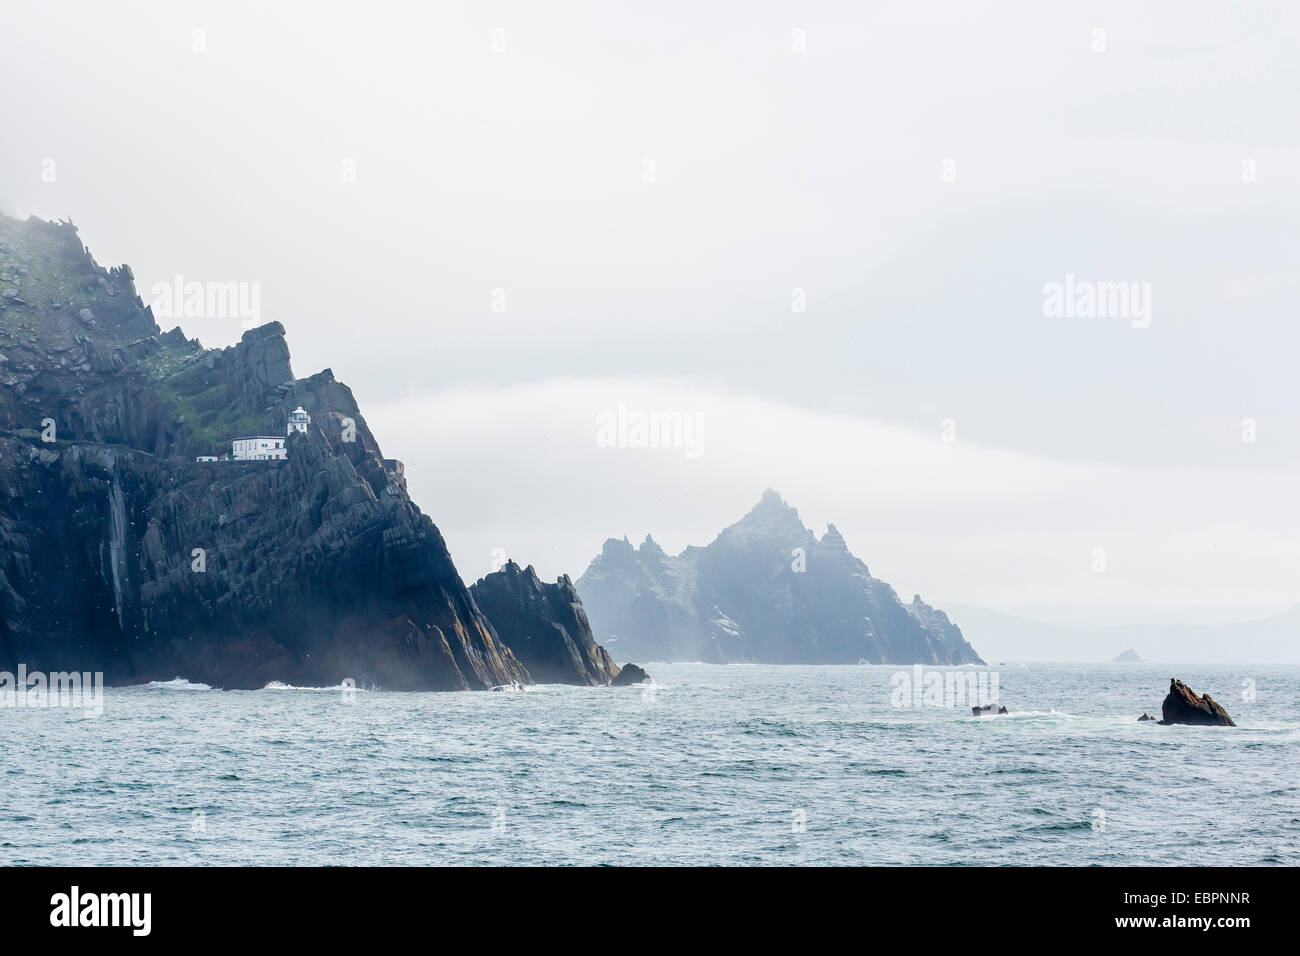 Fog shrouds the Skellig Islands, Great Skellig Michael in the foreground, County Kerry, Munster, Irish Sea, Republic of Ireland Stock Photo